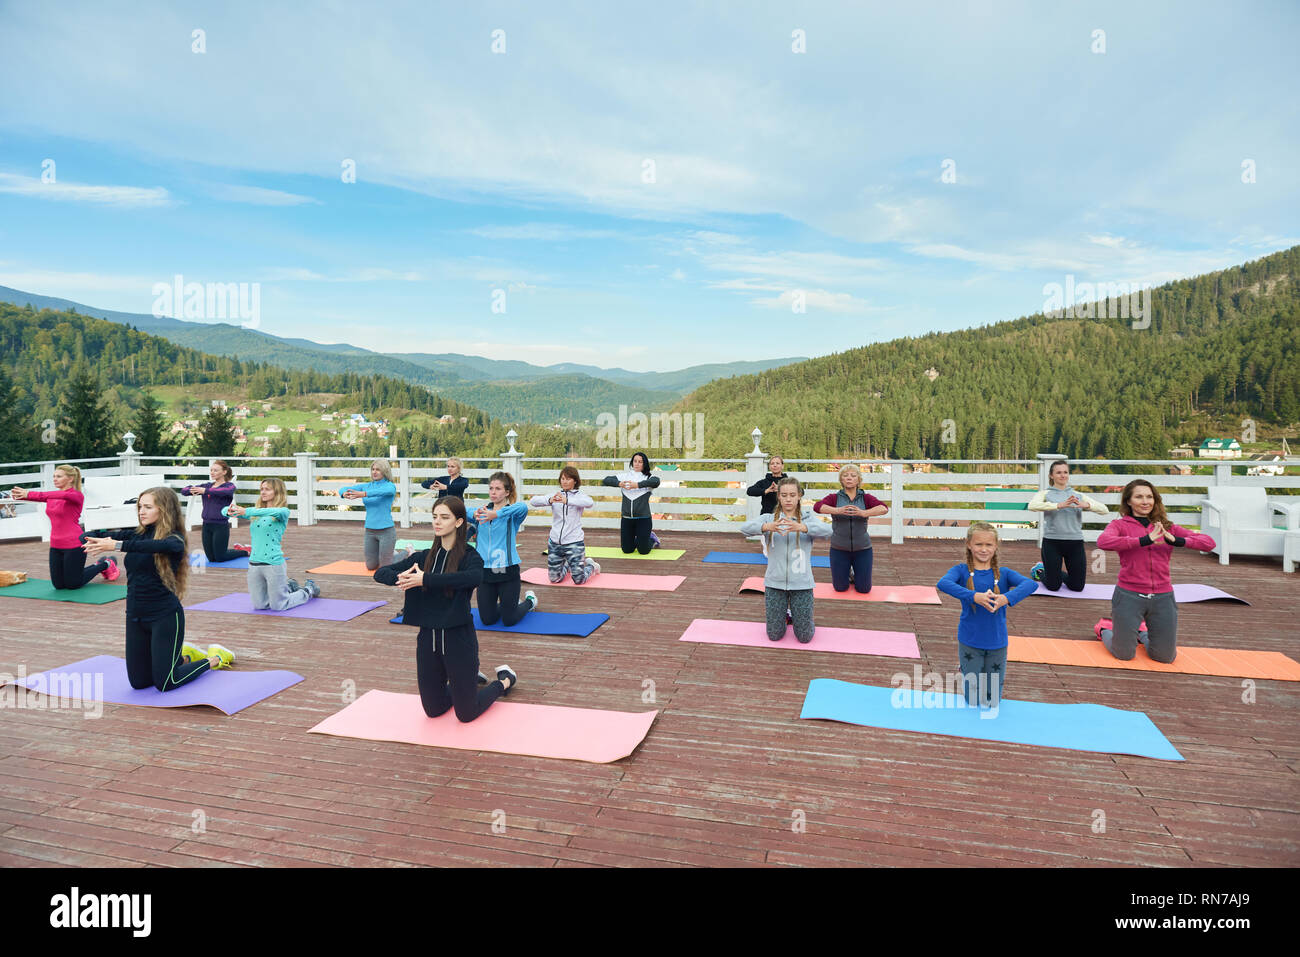 Female yoga group practicing yoga asana outdoors in mountains under blue sky. Women standing on knees and putting hands. People using yoga mats for doing exercises. Stock Photo